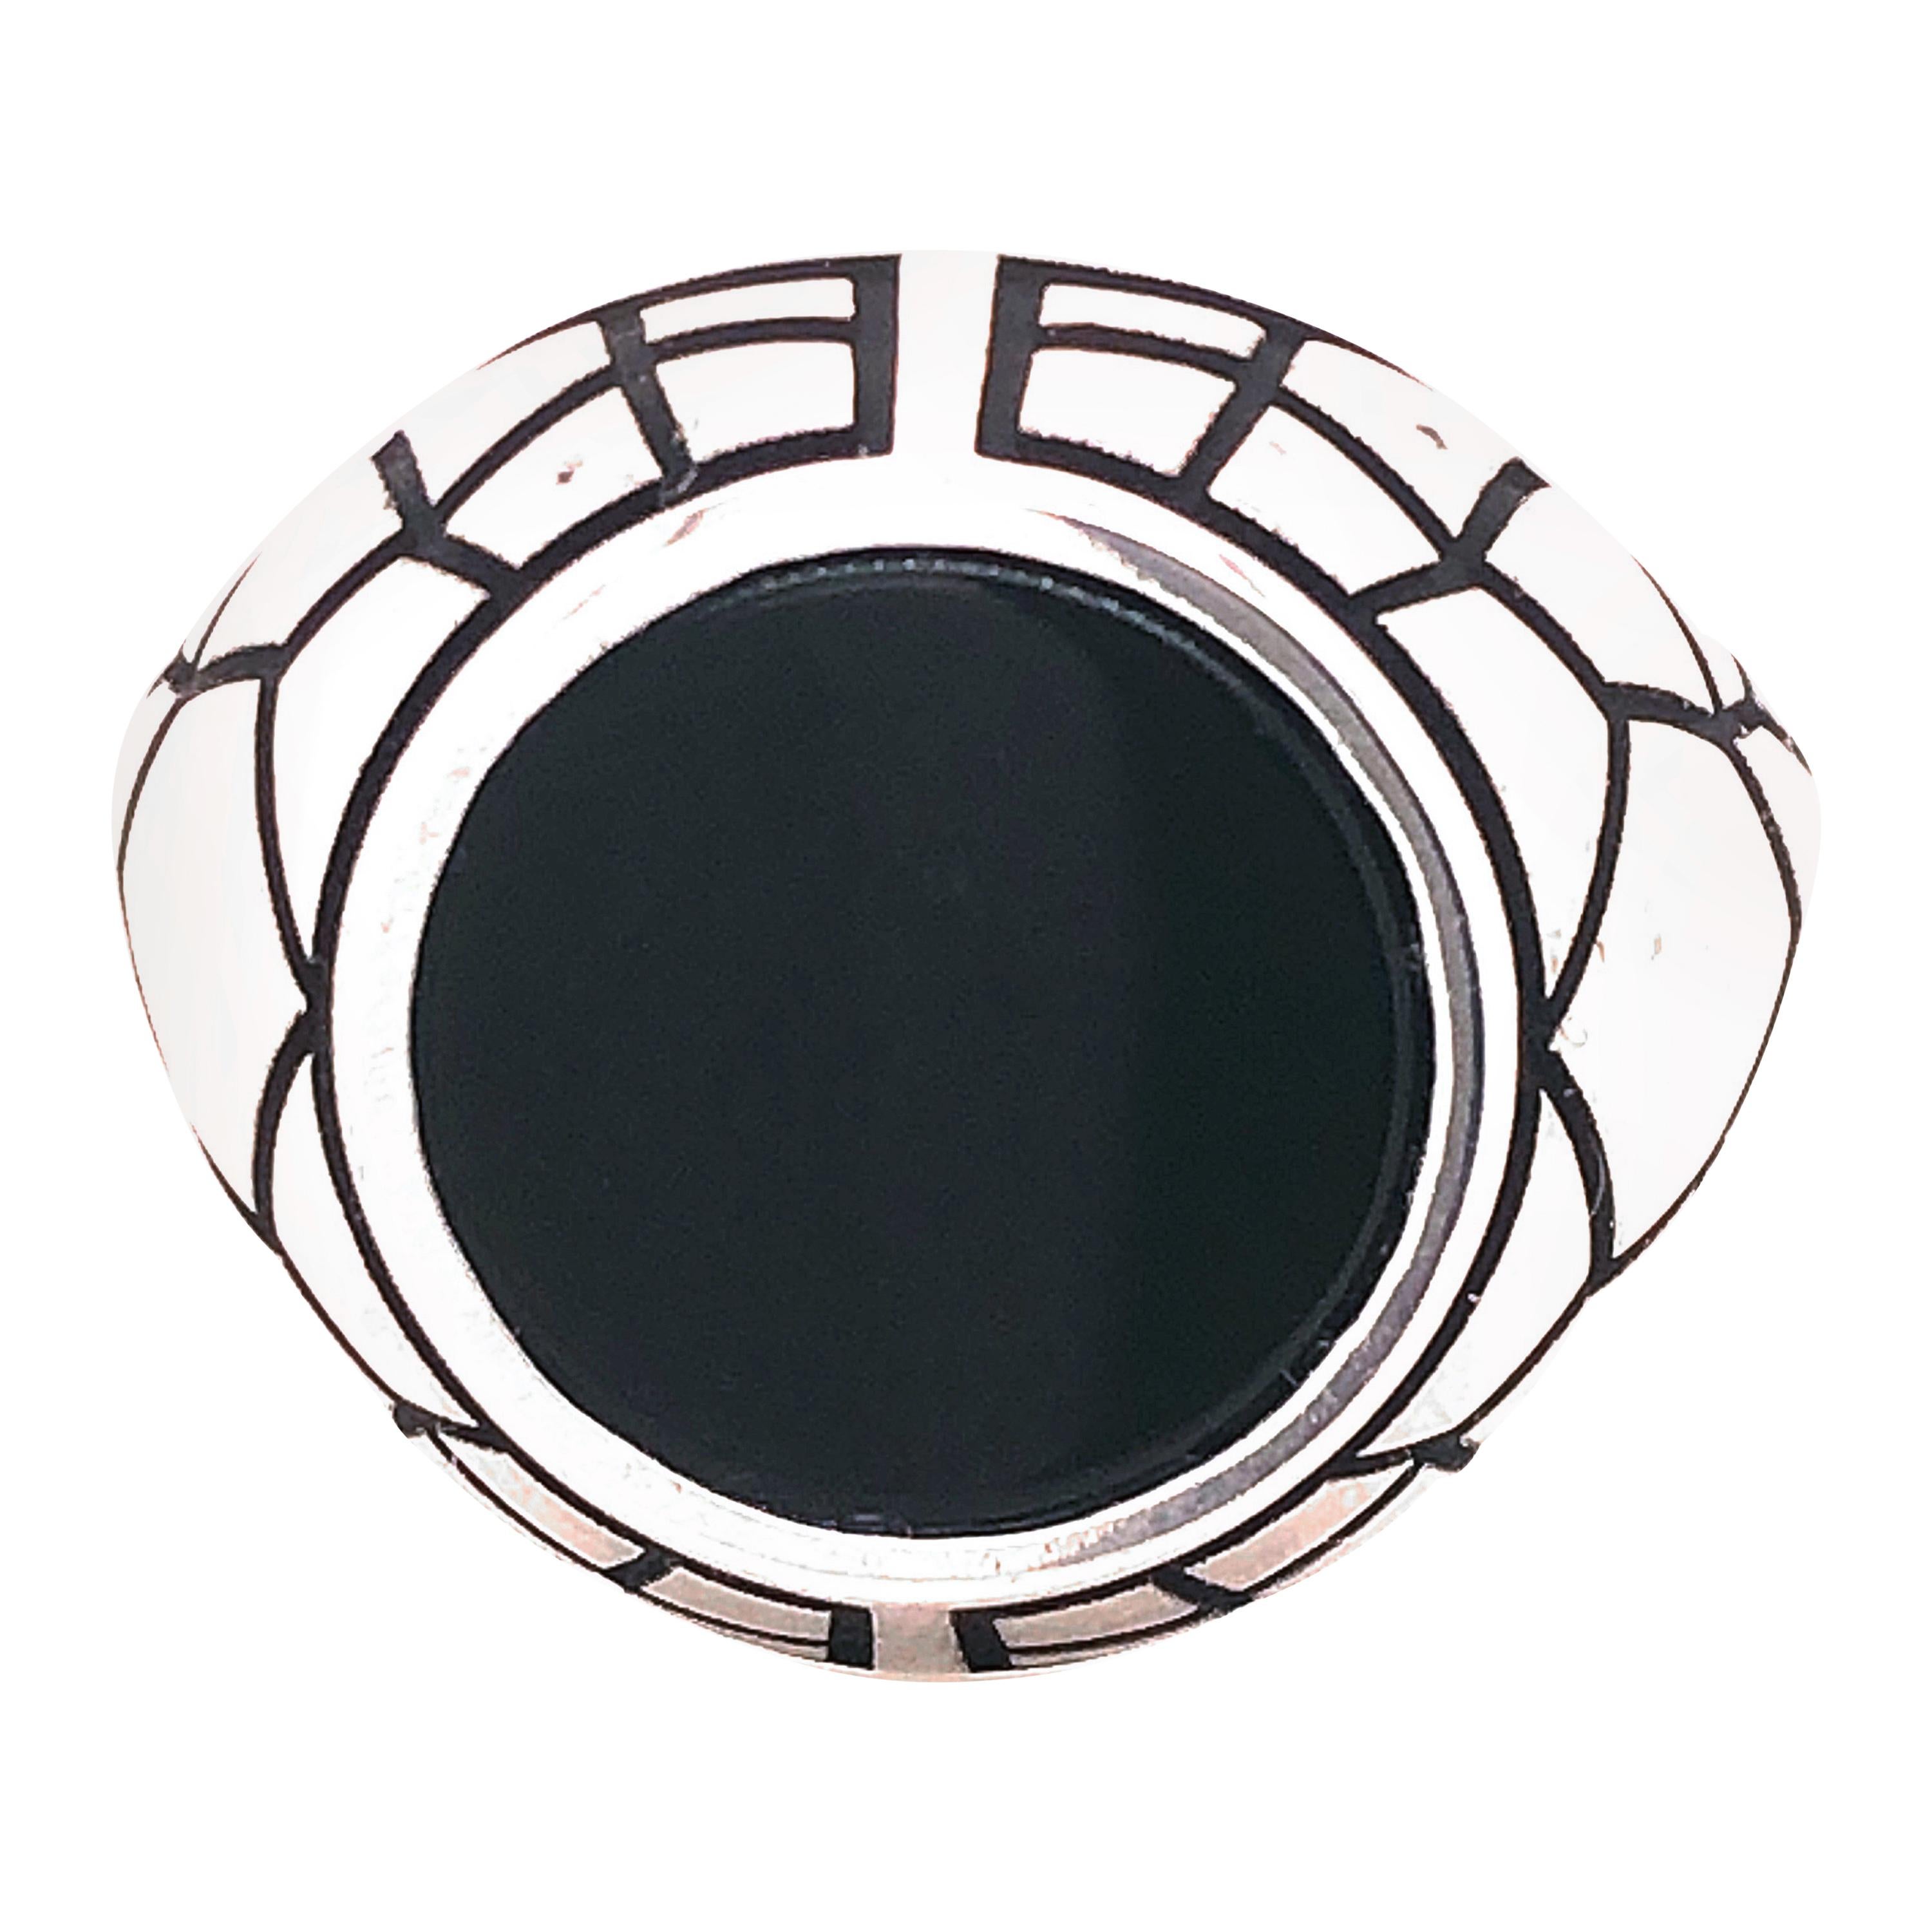 Berca Round Onyx Black Spiderweb Hand Enameled Sterling Silver Cocktail Ring